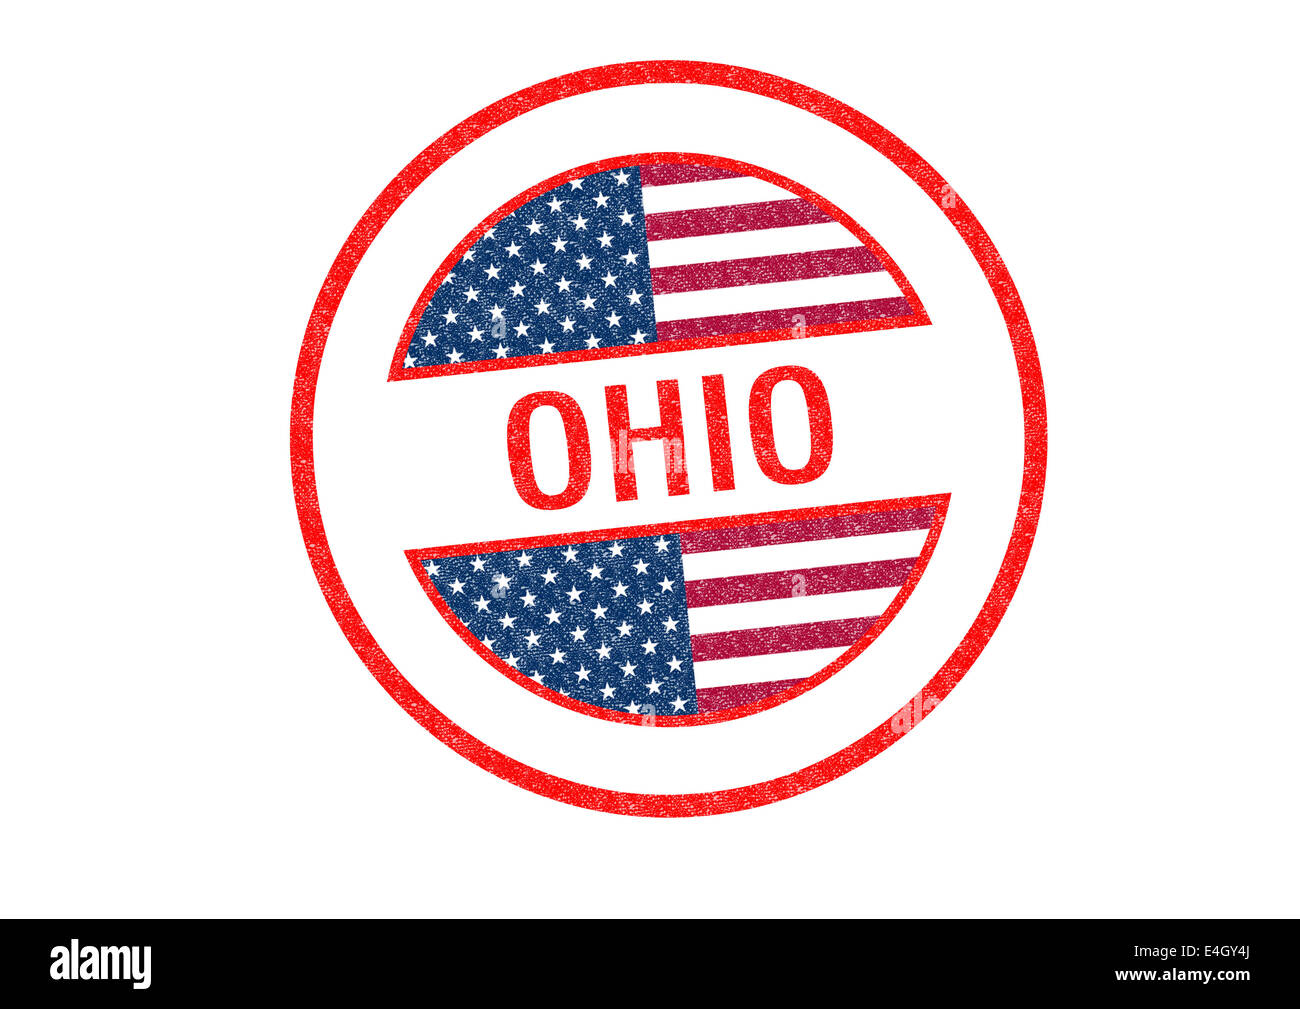 Passport-style OHIO rubber stamp over a white background. Stock Photo